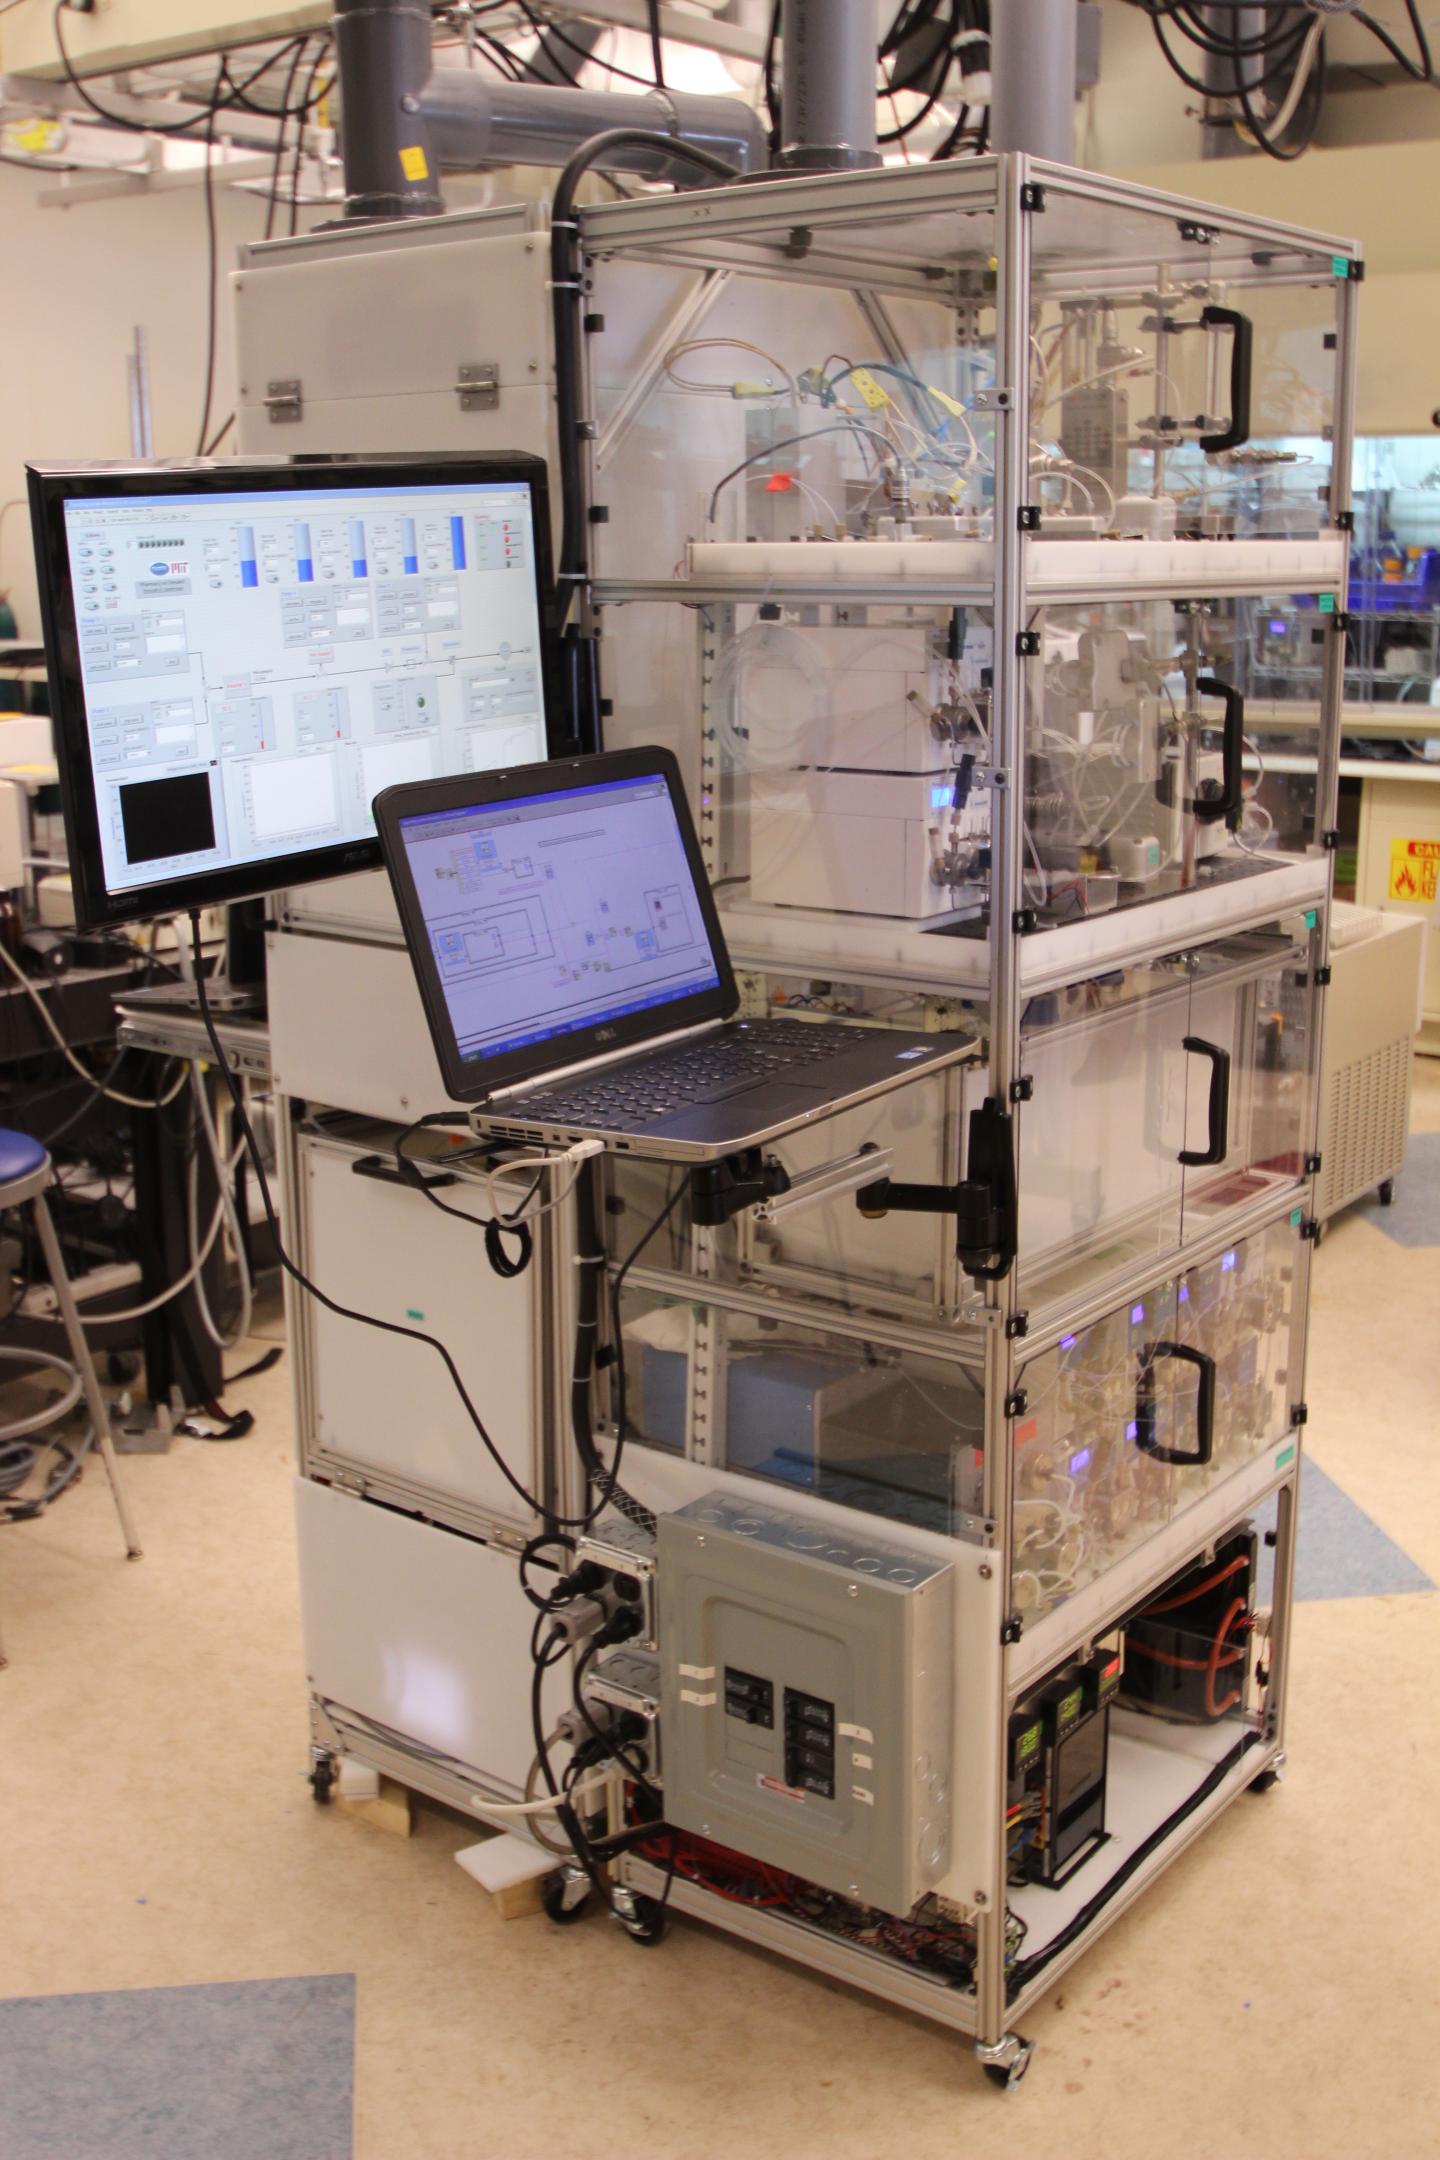 Compact Drug Synthesizer Could Revolutionize Drug Delivery (1 of 2)